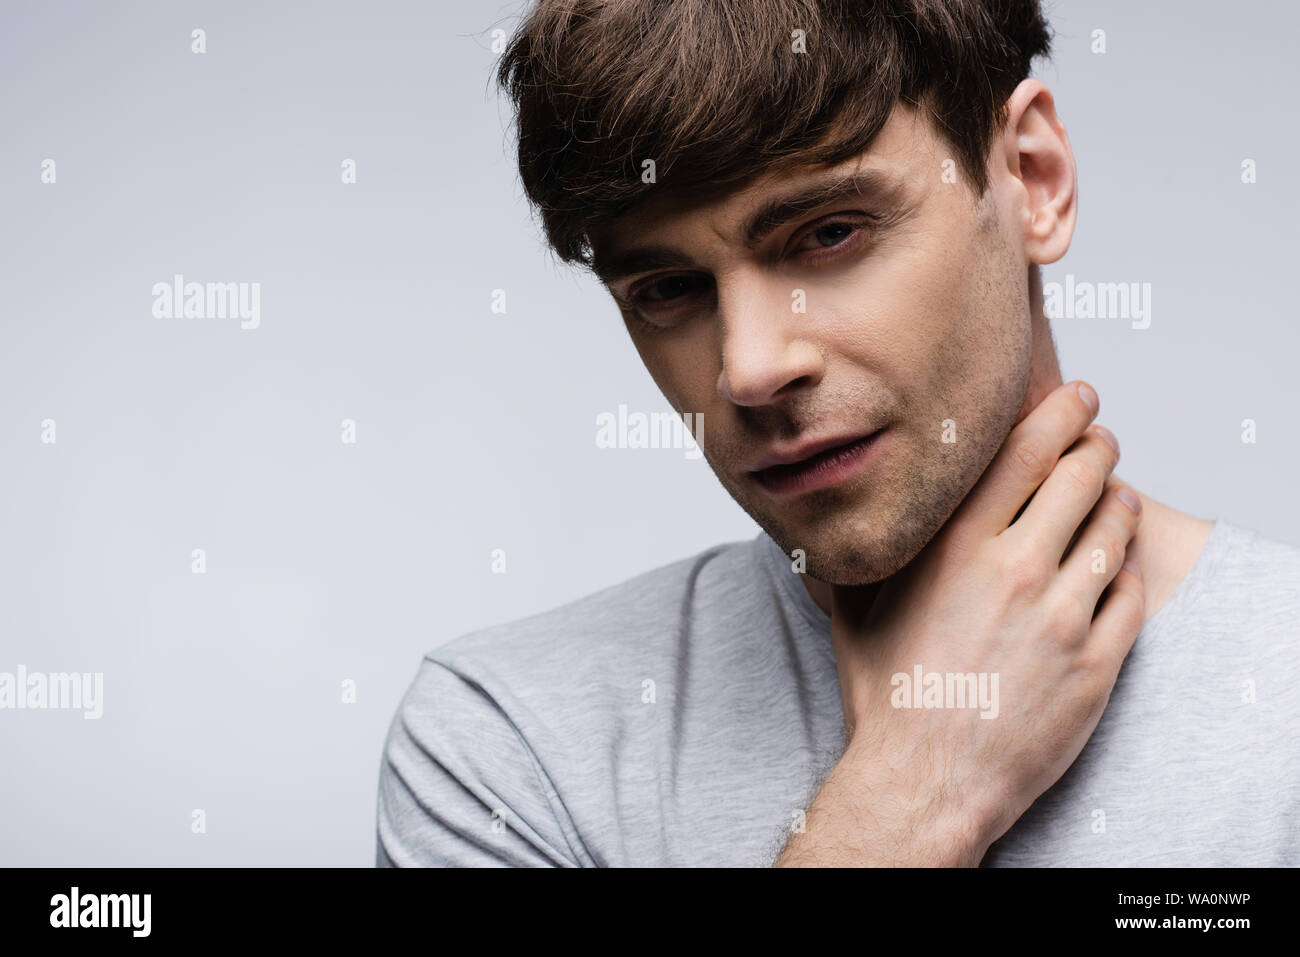 thoughtful man holding hand on neck isolated on grey, human emotion and expression concept Stock Photo